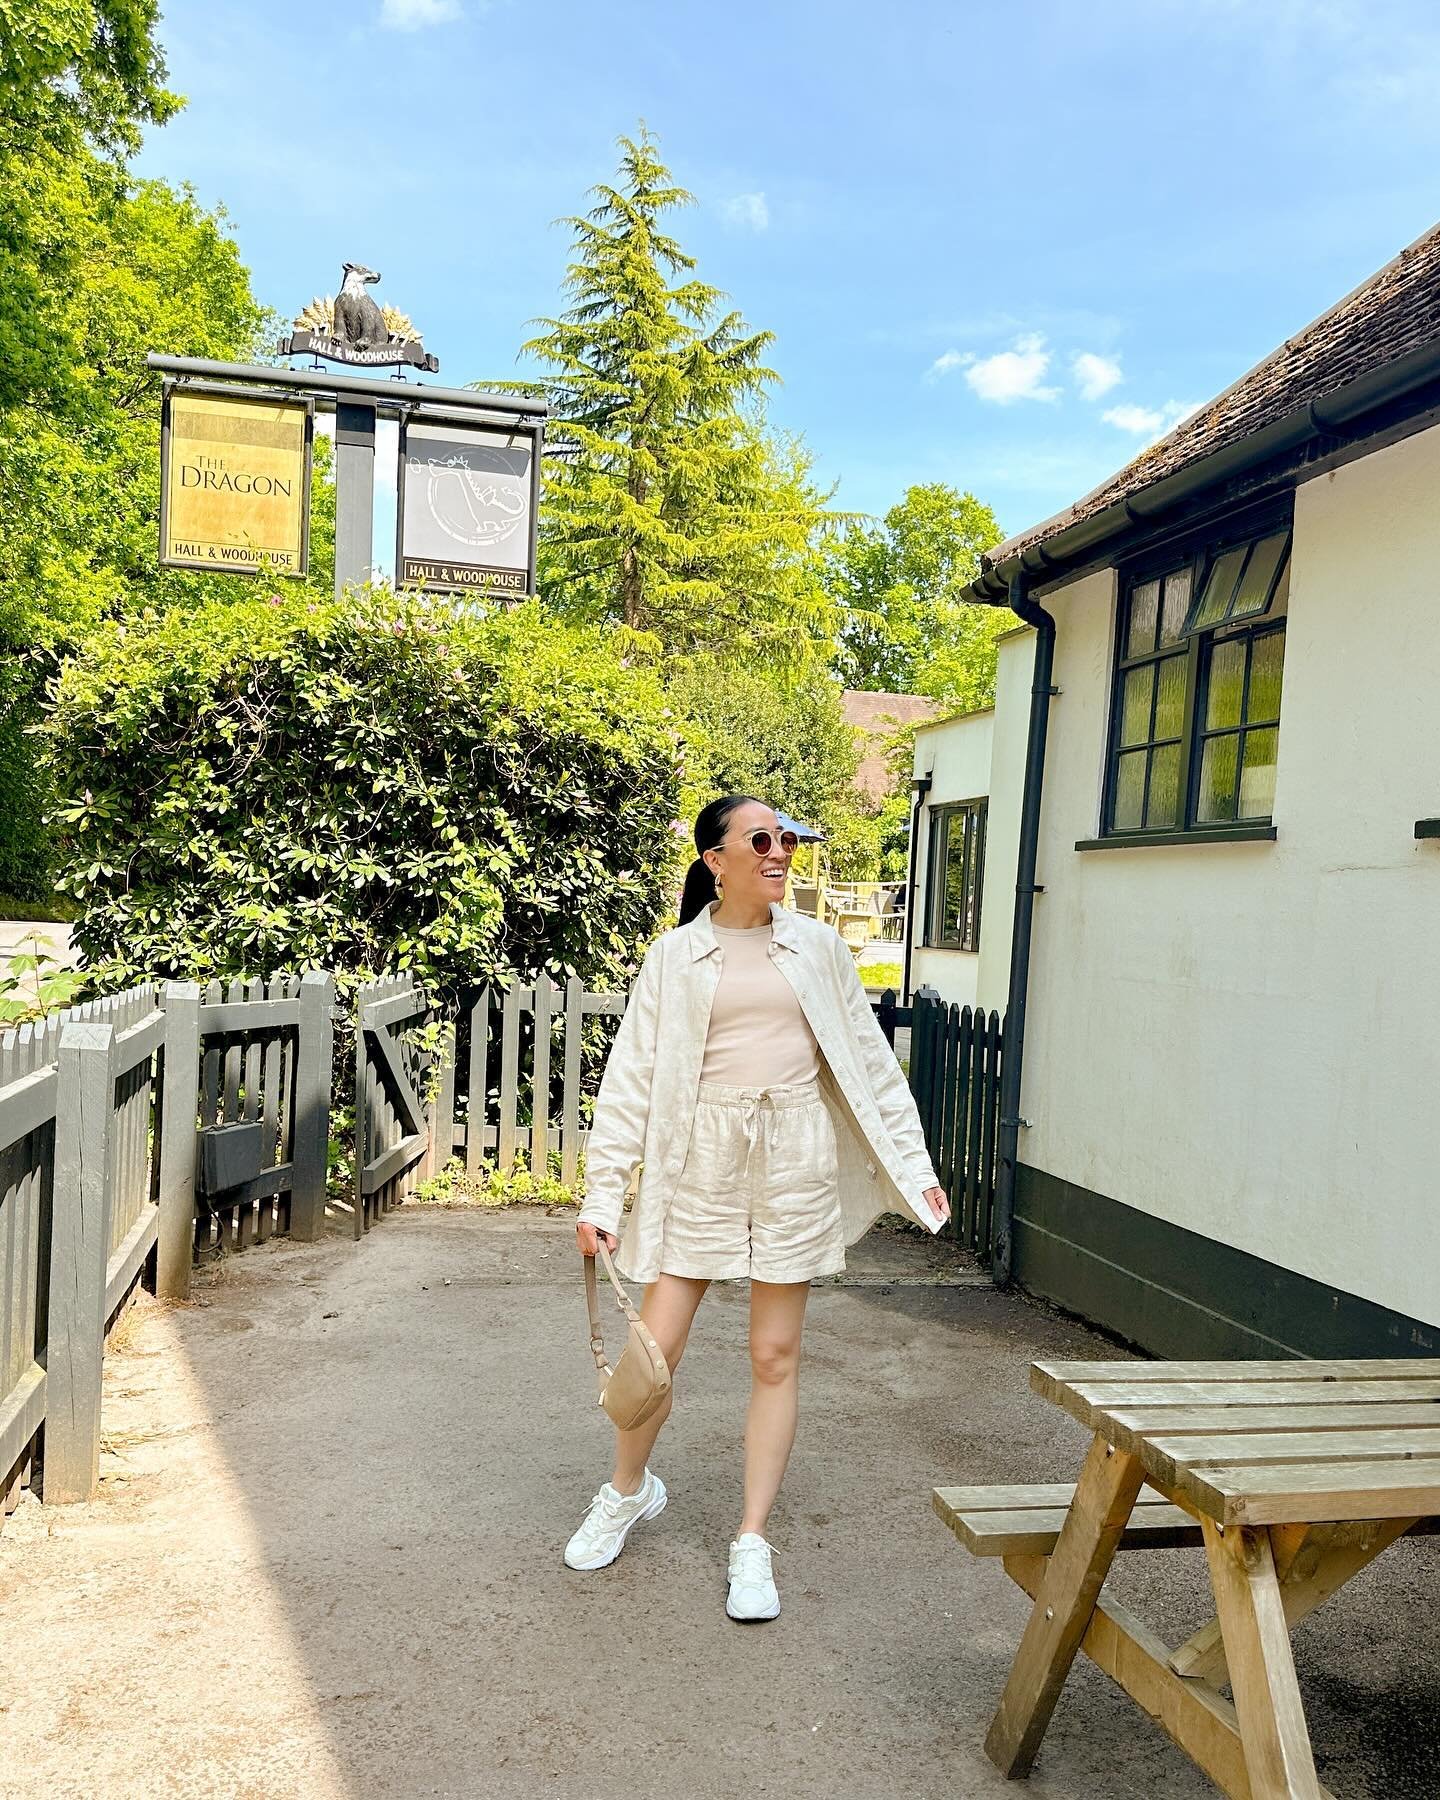 Obsessed with the #linenclothing from @fandfclothing, had to wear it out immediately cause the weather was the warmest it has been all year here ☀️ #linenstyle #springsummerstyle #fandfclothing #tescoclothing #tescofinds #ukpub #englishpubs #dragonco